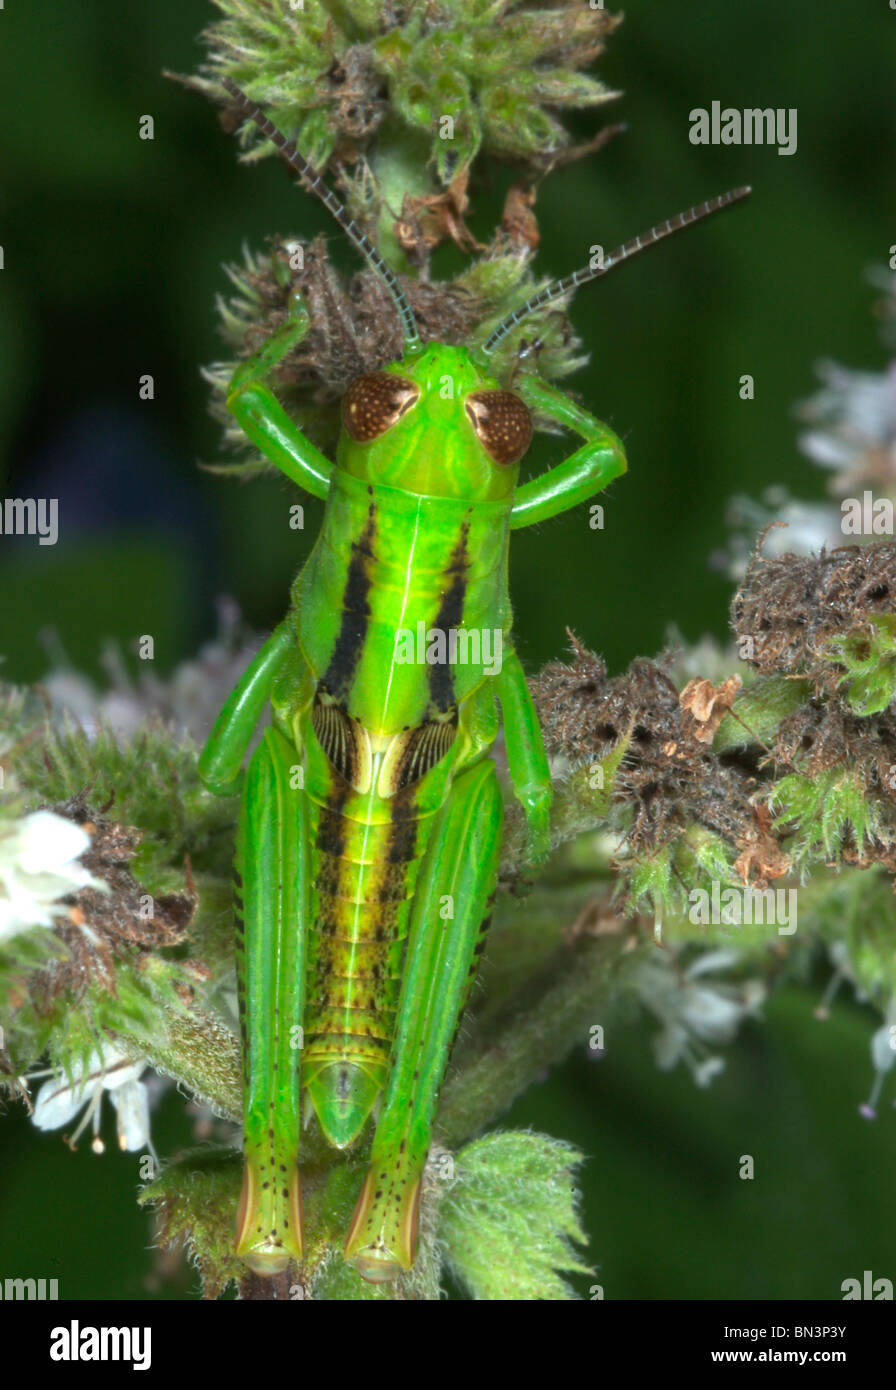 Differential Grasshopper, Melanoplus differentialis, on a plant, close-up Stock Photo